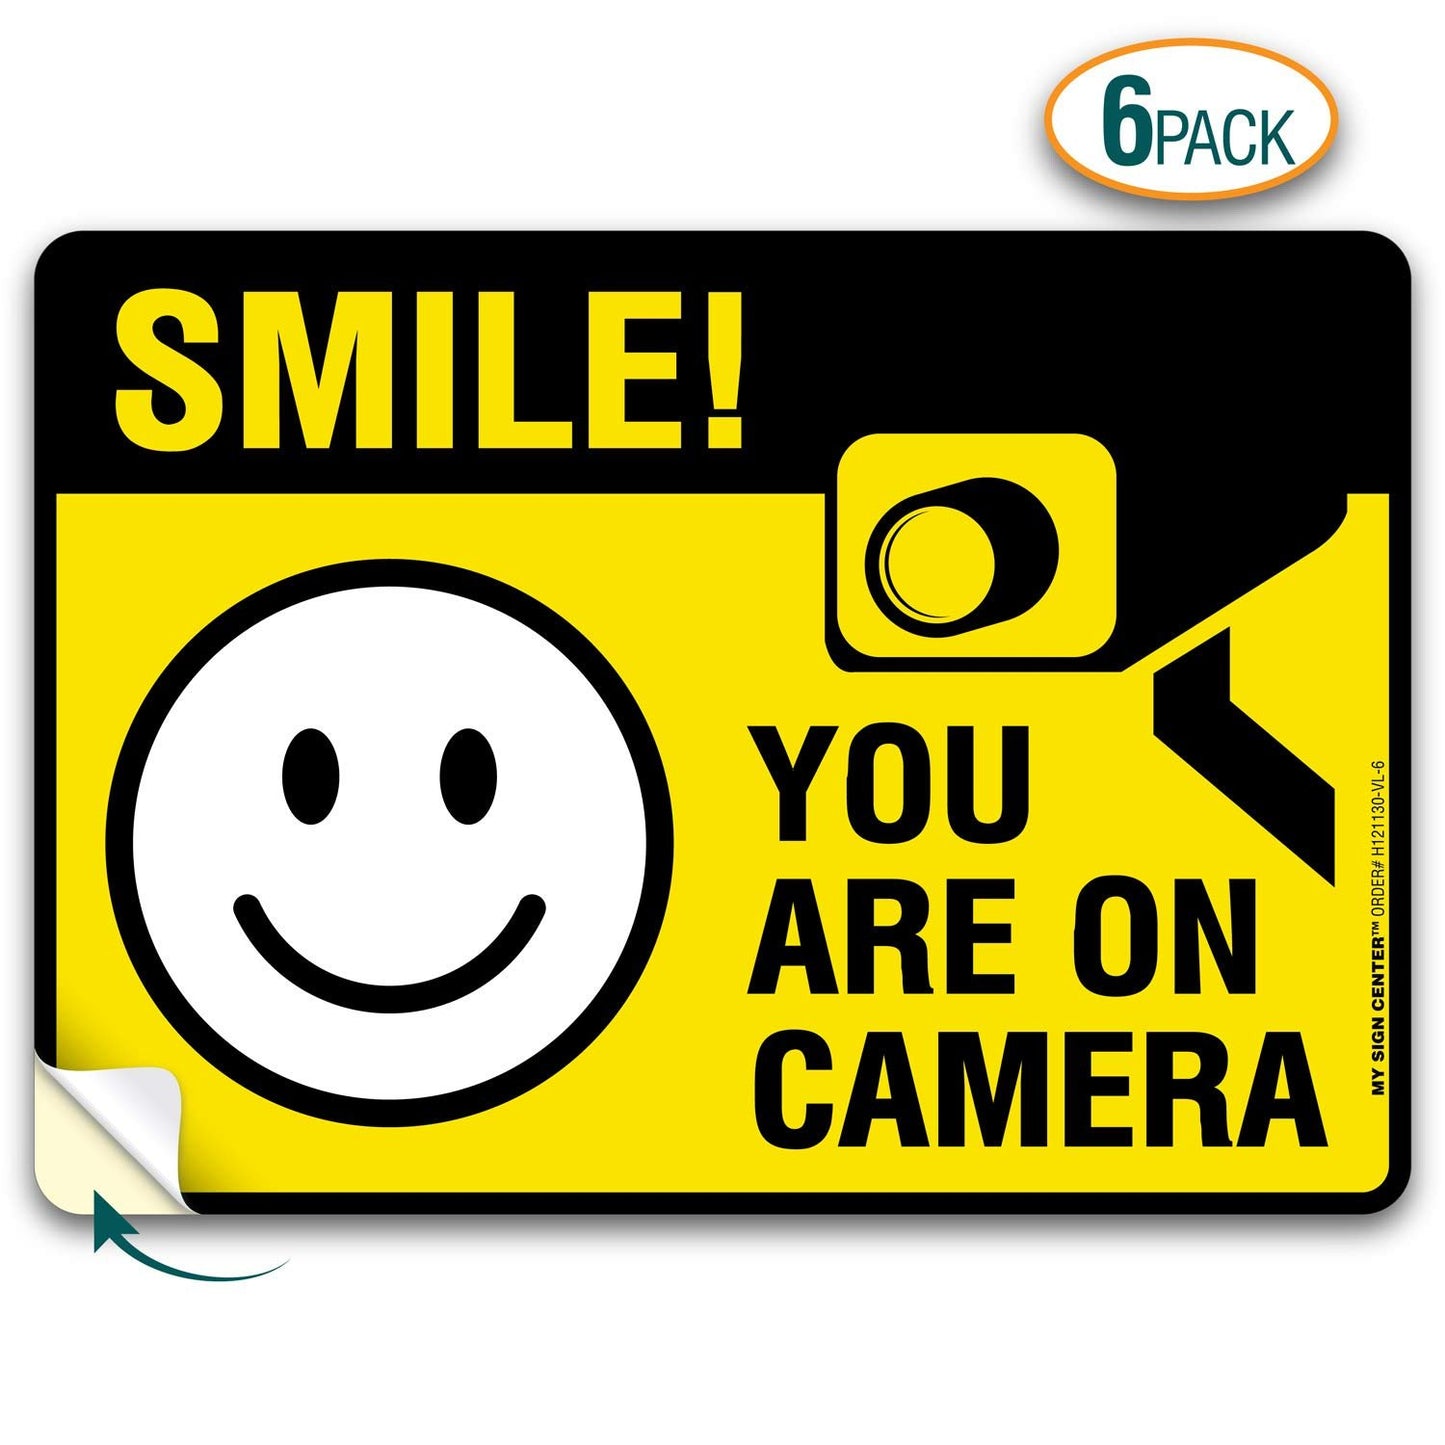 Smile You're on Camera Sticker (6 Pack)